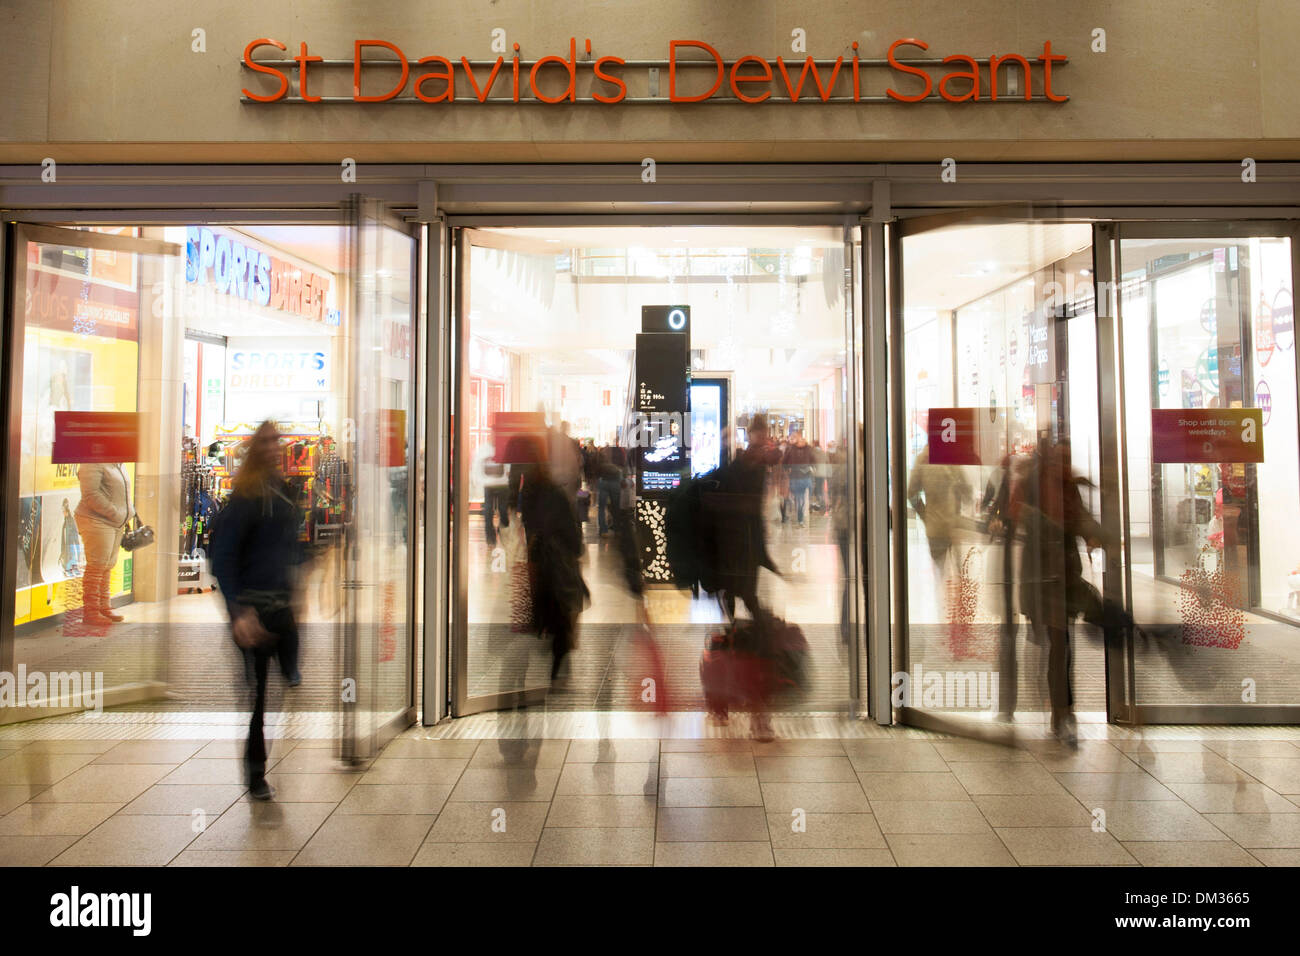 Cardiff, Wales, UK. 11th Dec, 2013. Christmas shoppers in St. David's shopping centre on December 10, 2013 in Cardiff, Wales. The shopping centre is recording record sales in the run up to Christmas (Photo by Matthew Horwood/Alamy Live News) Stock Photo